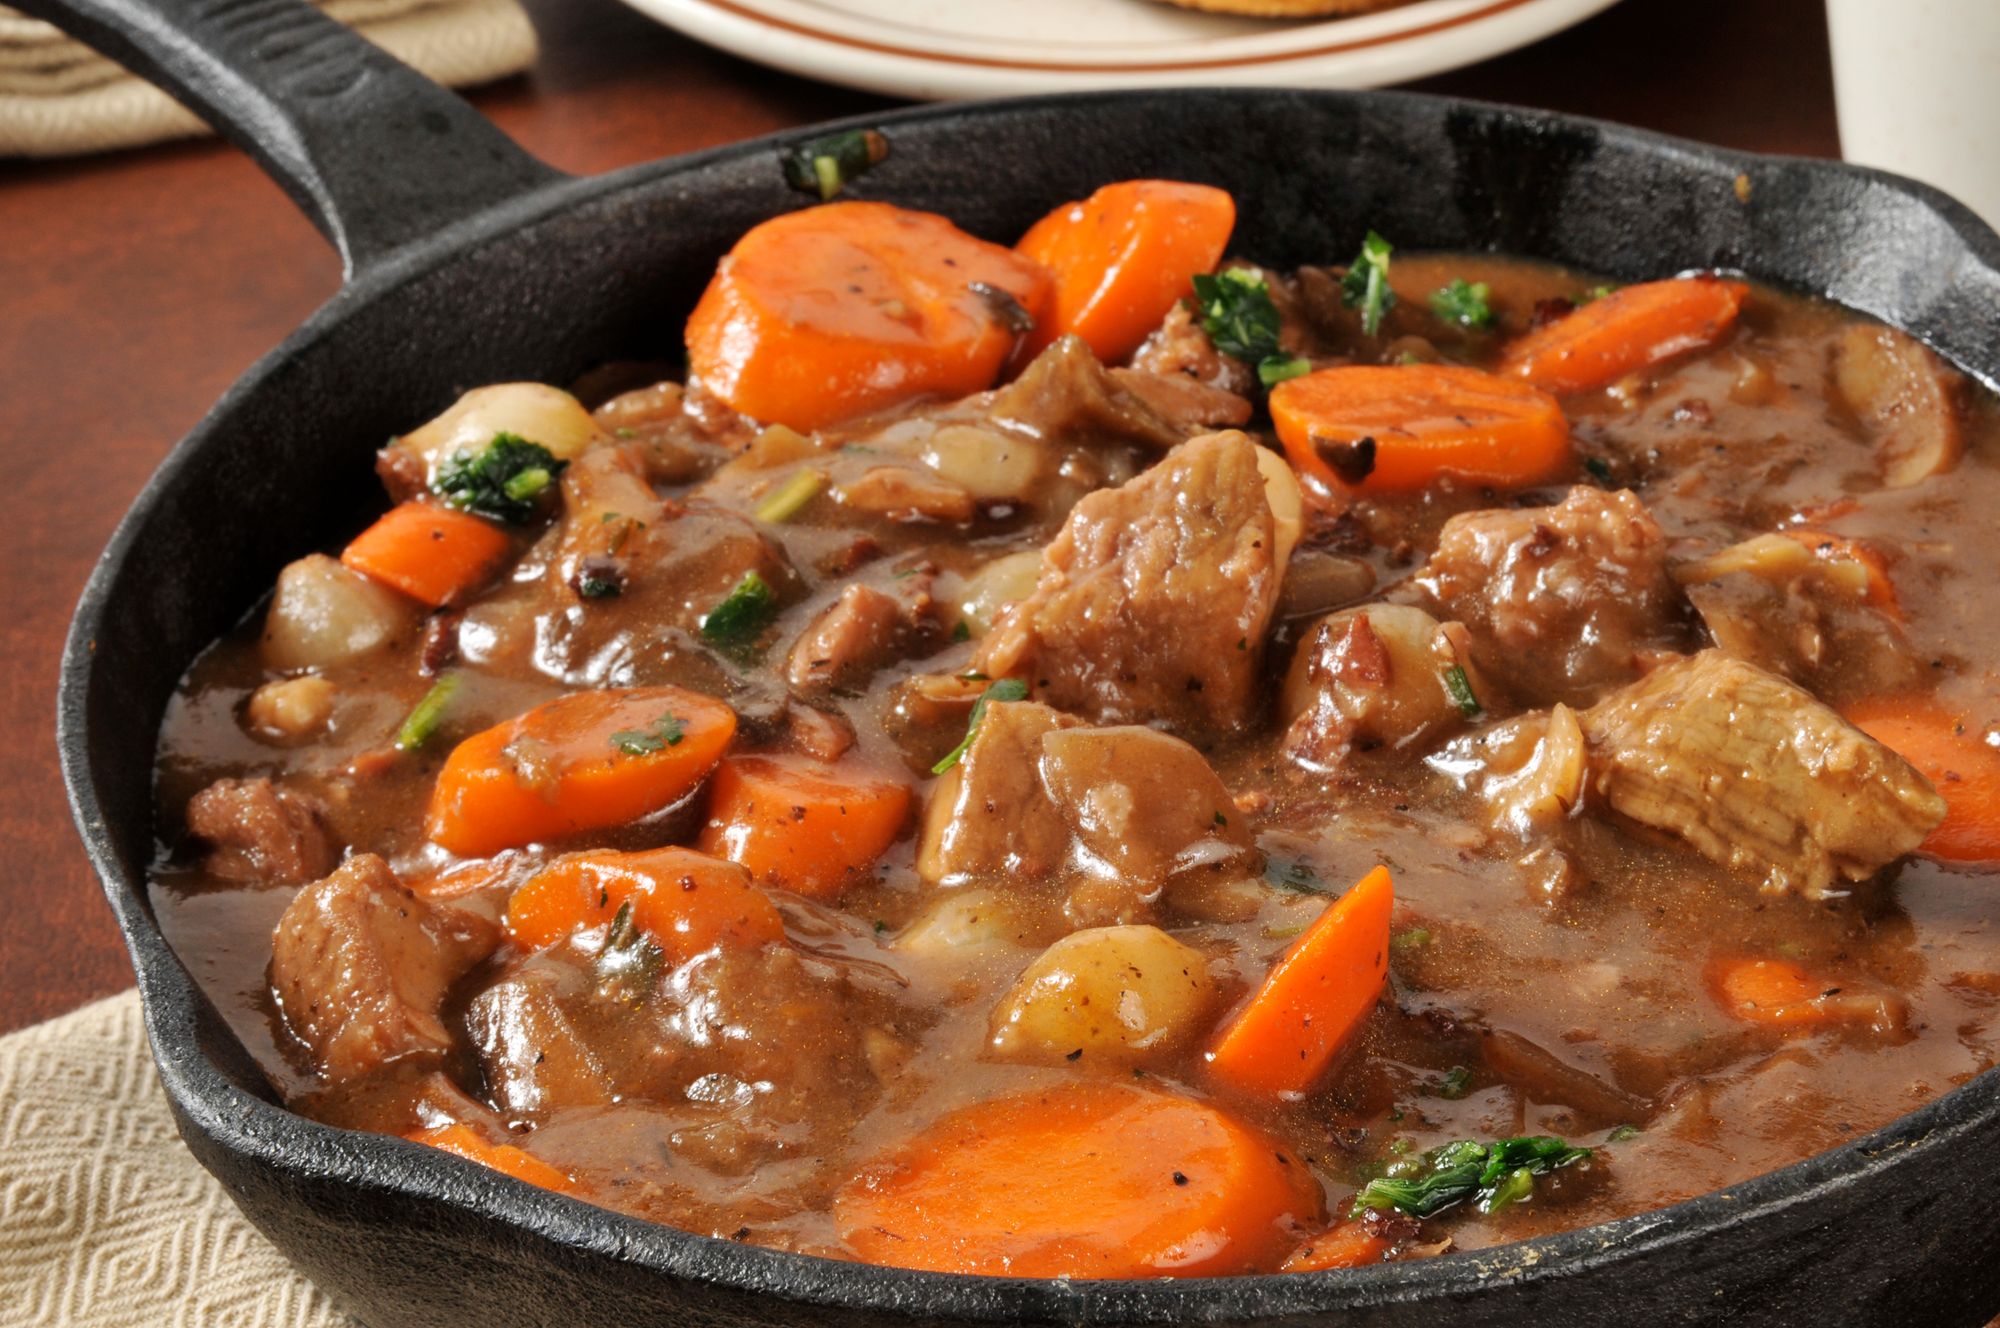 Beef, Wine and Carrot Stew